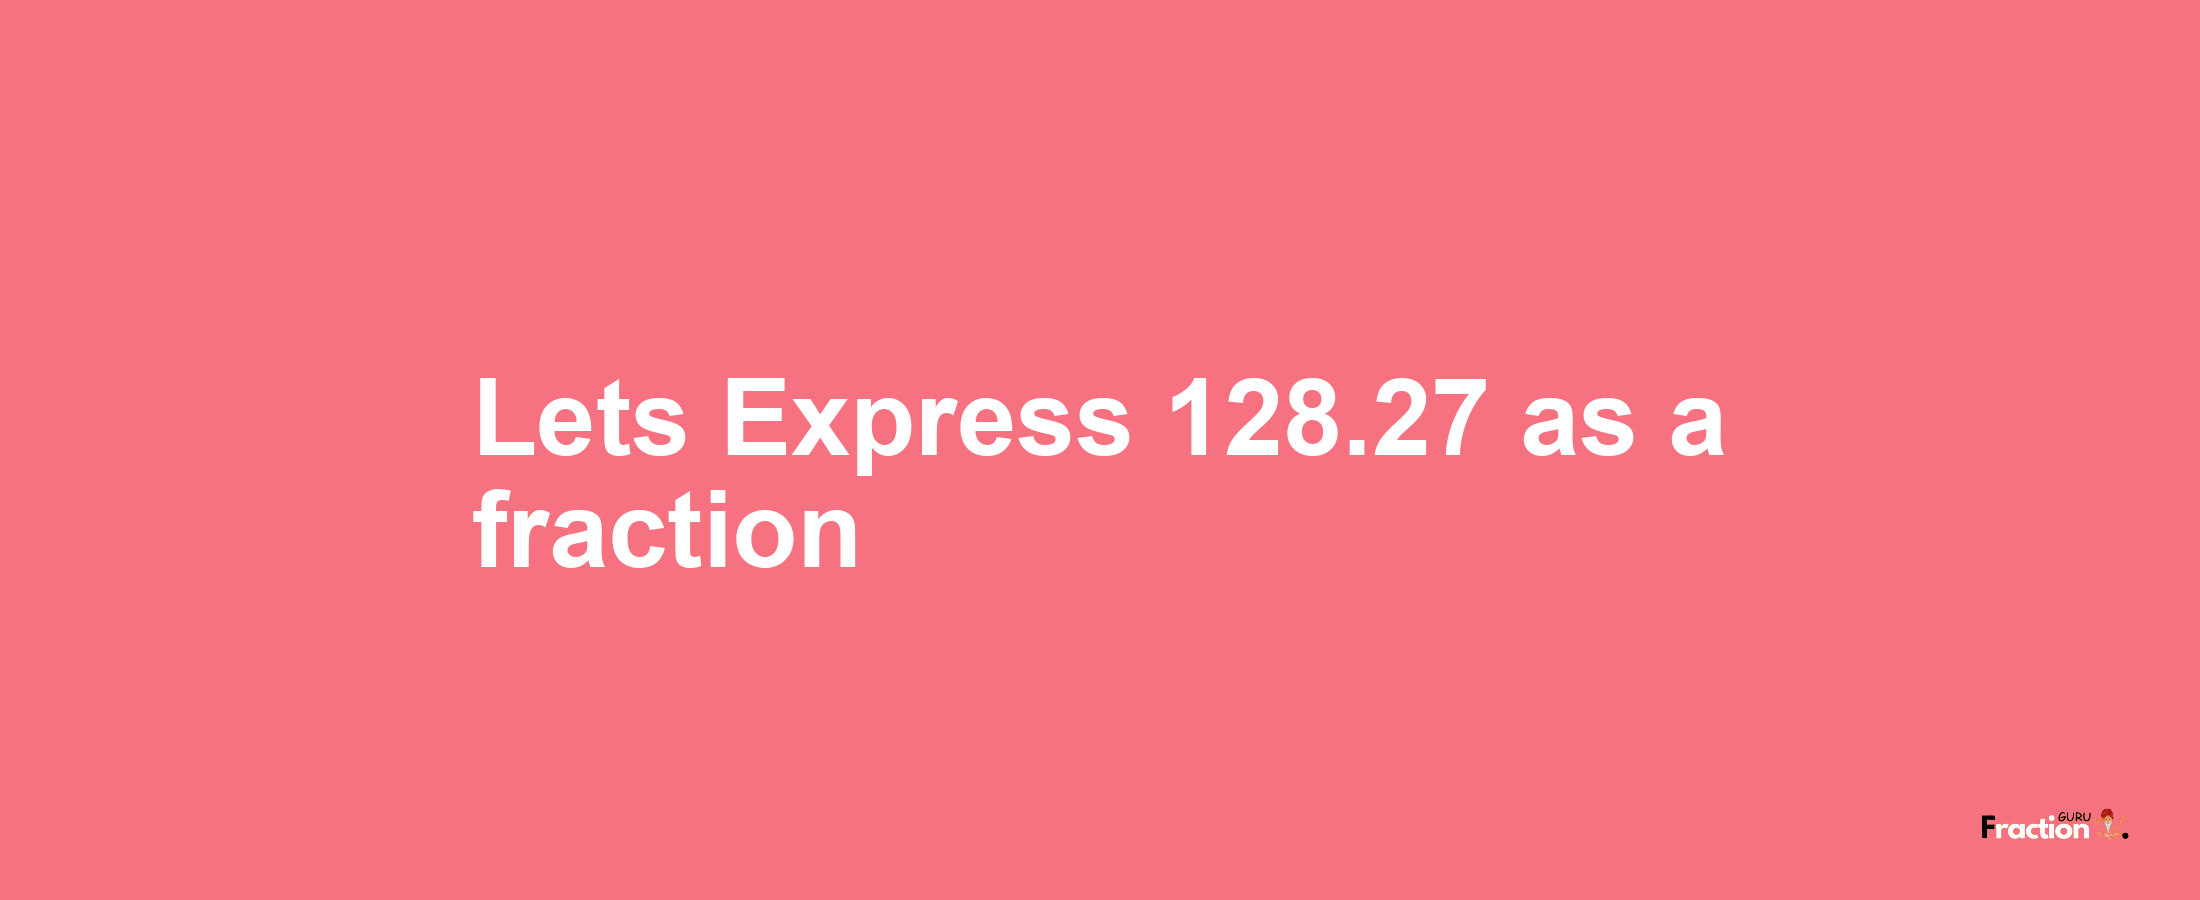 Lets Express 128.27 as afraction